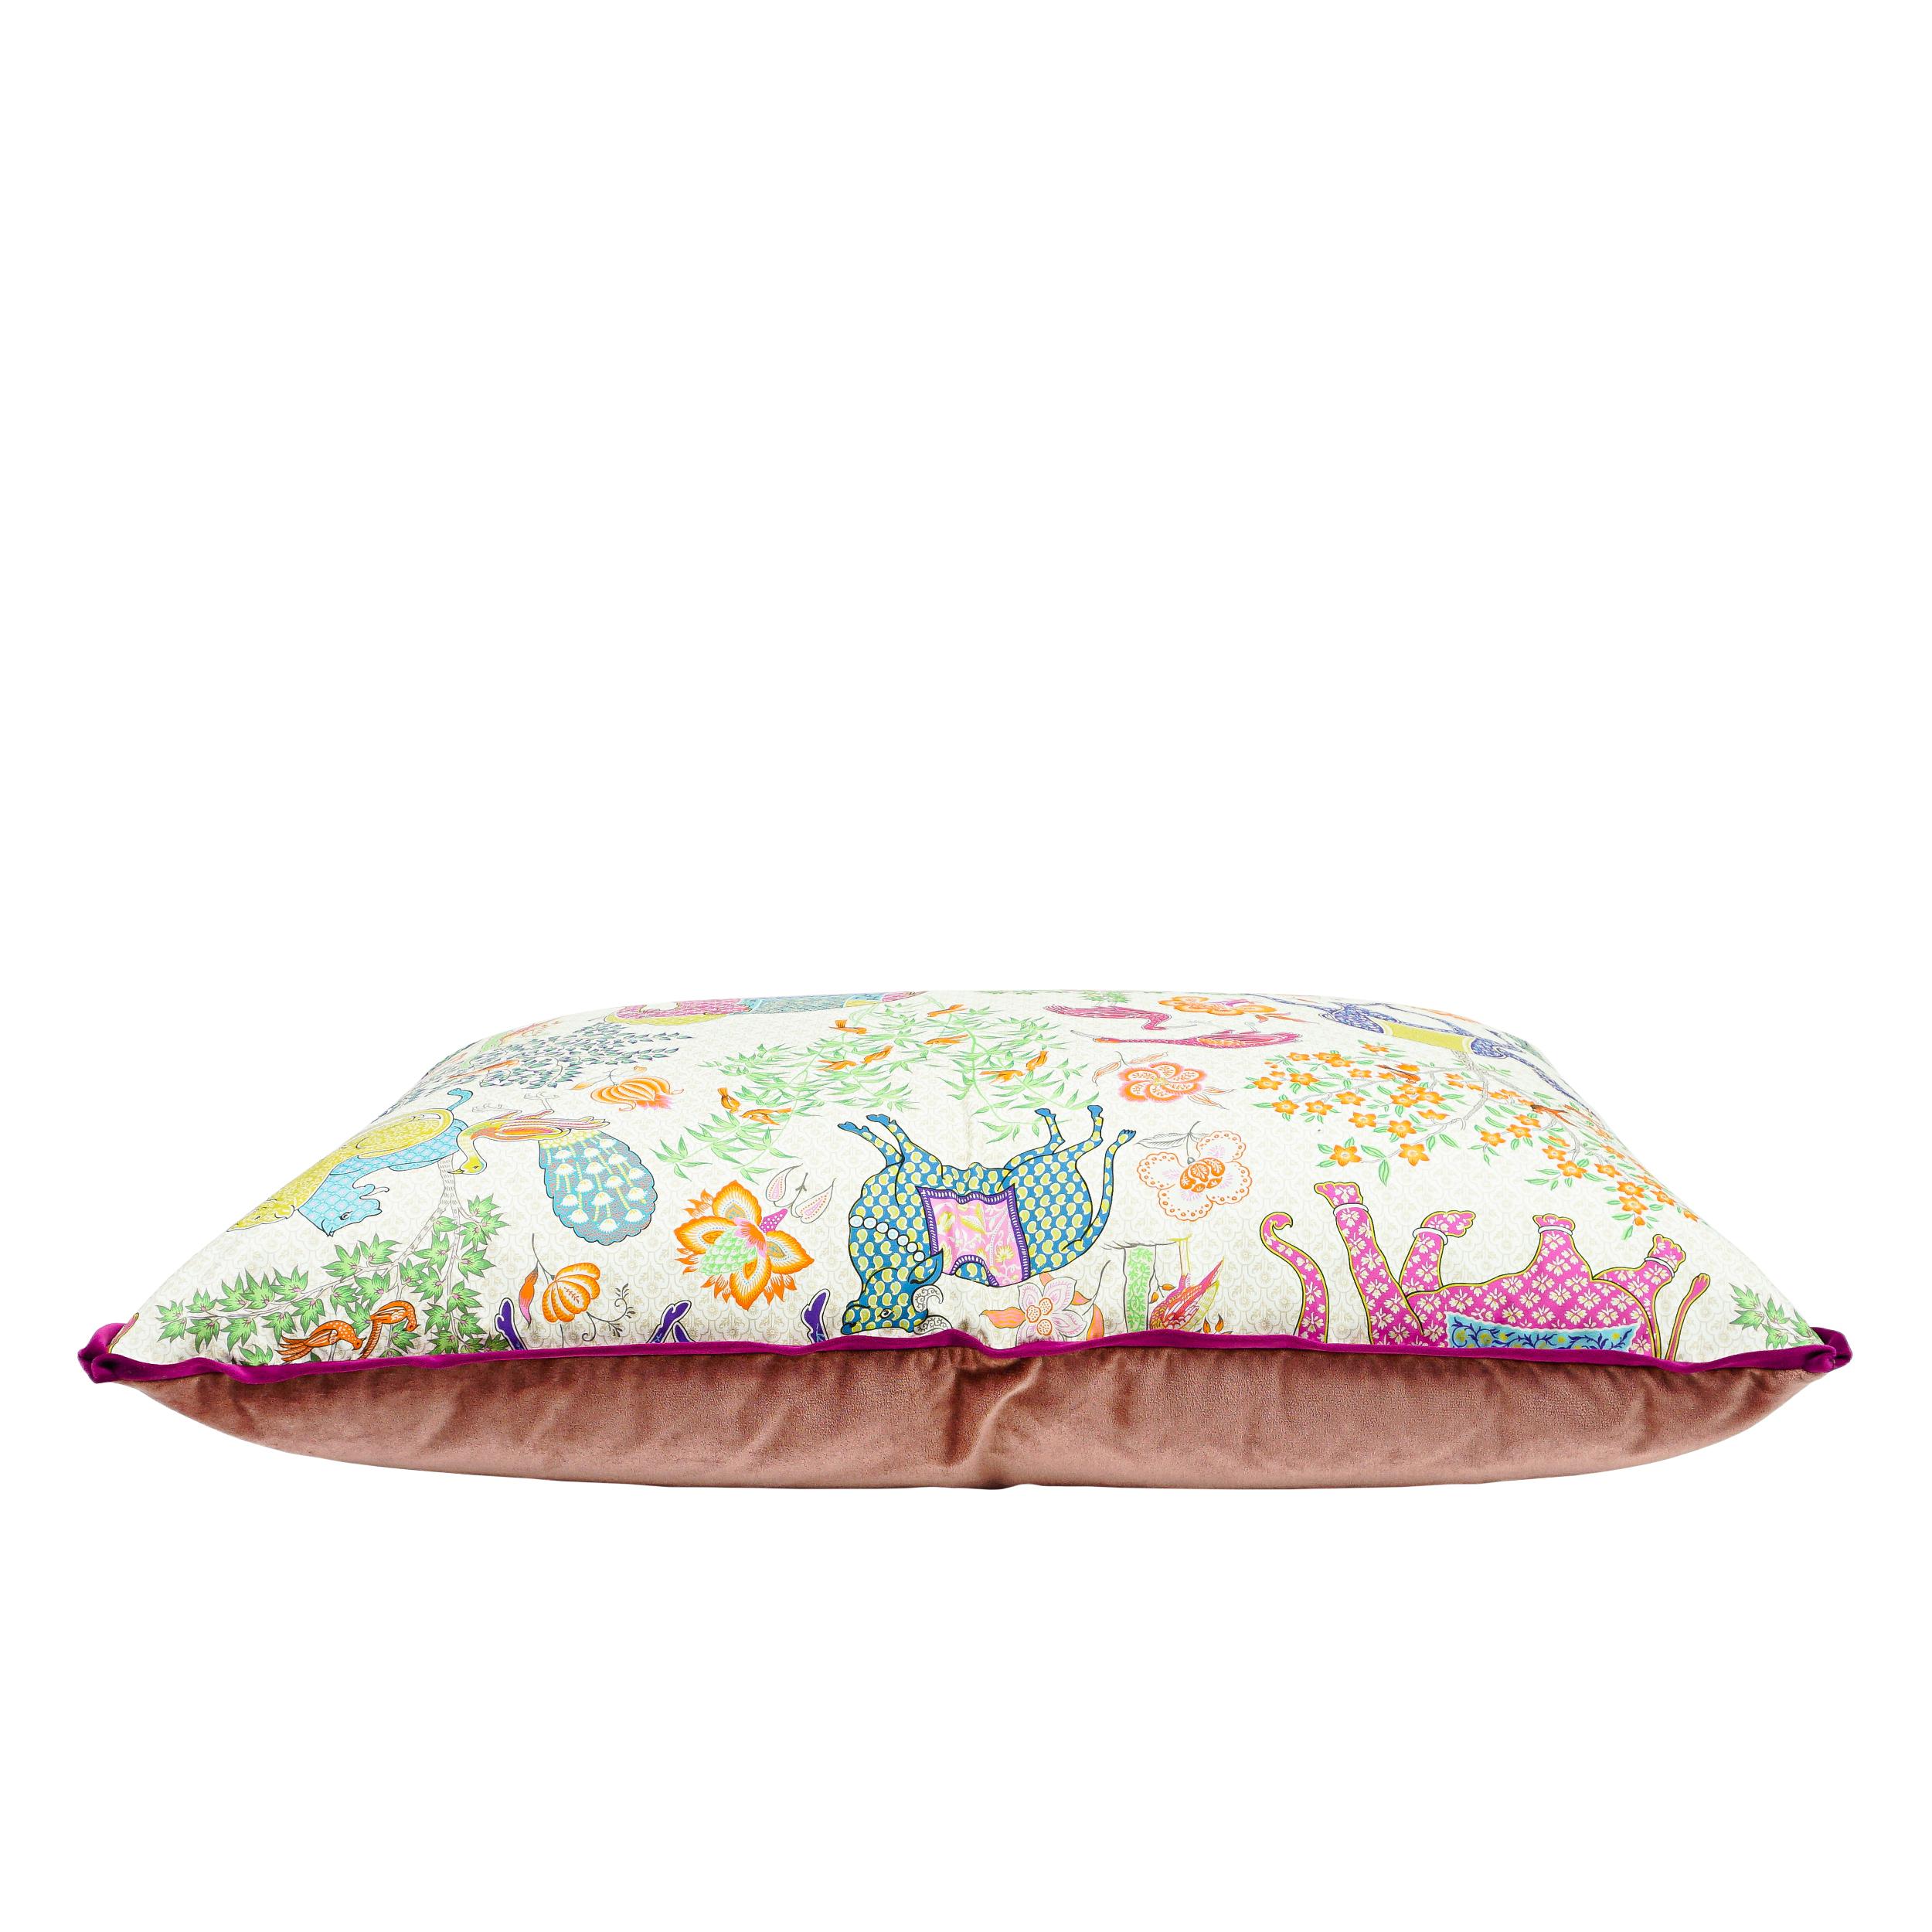 Exotic Playful Oversized Pillow with Elephant Camel Printed Cotton & Pink Velvet For Sale 4